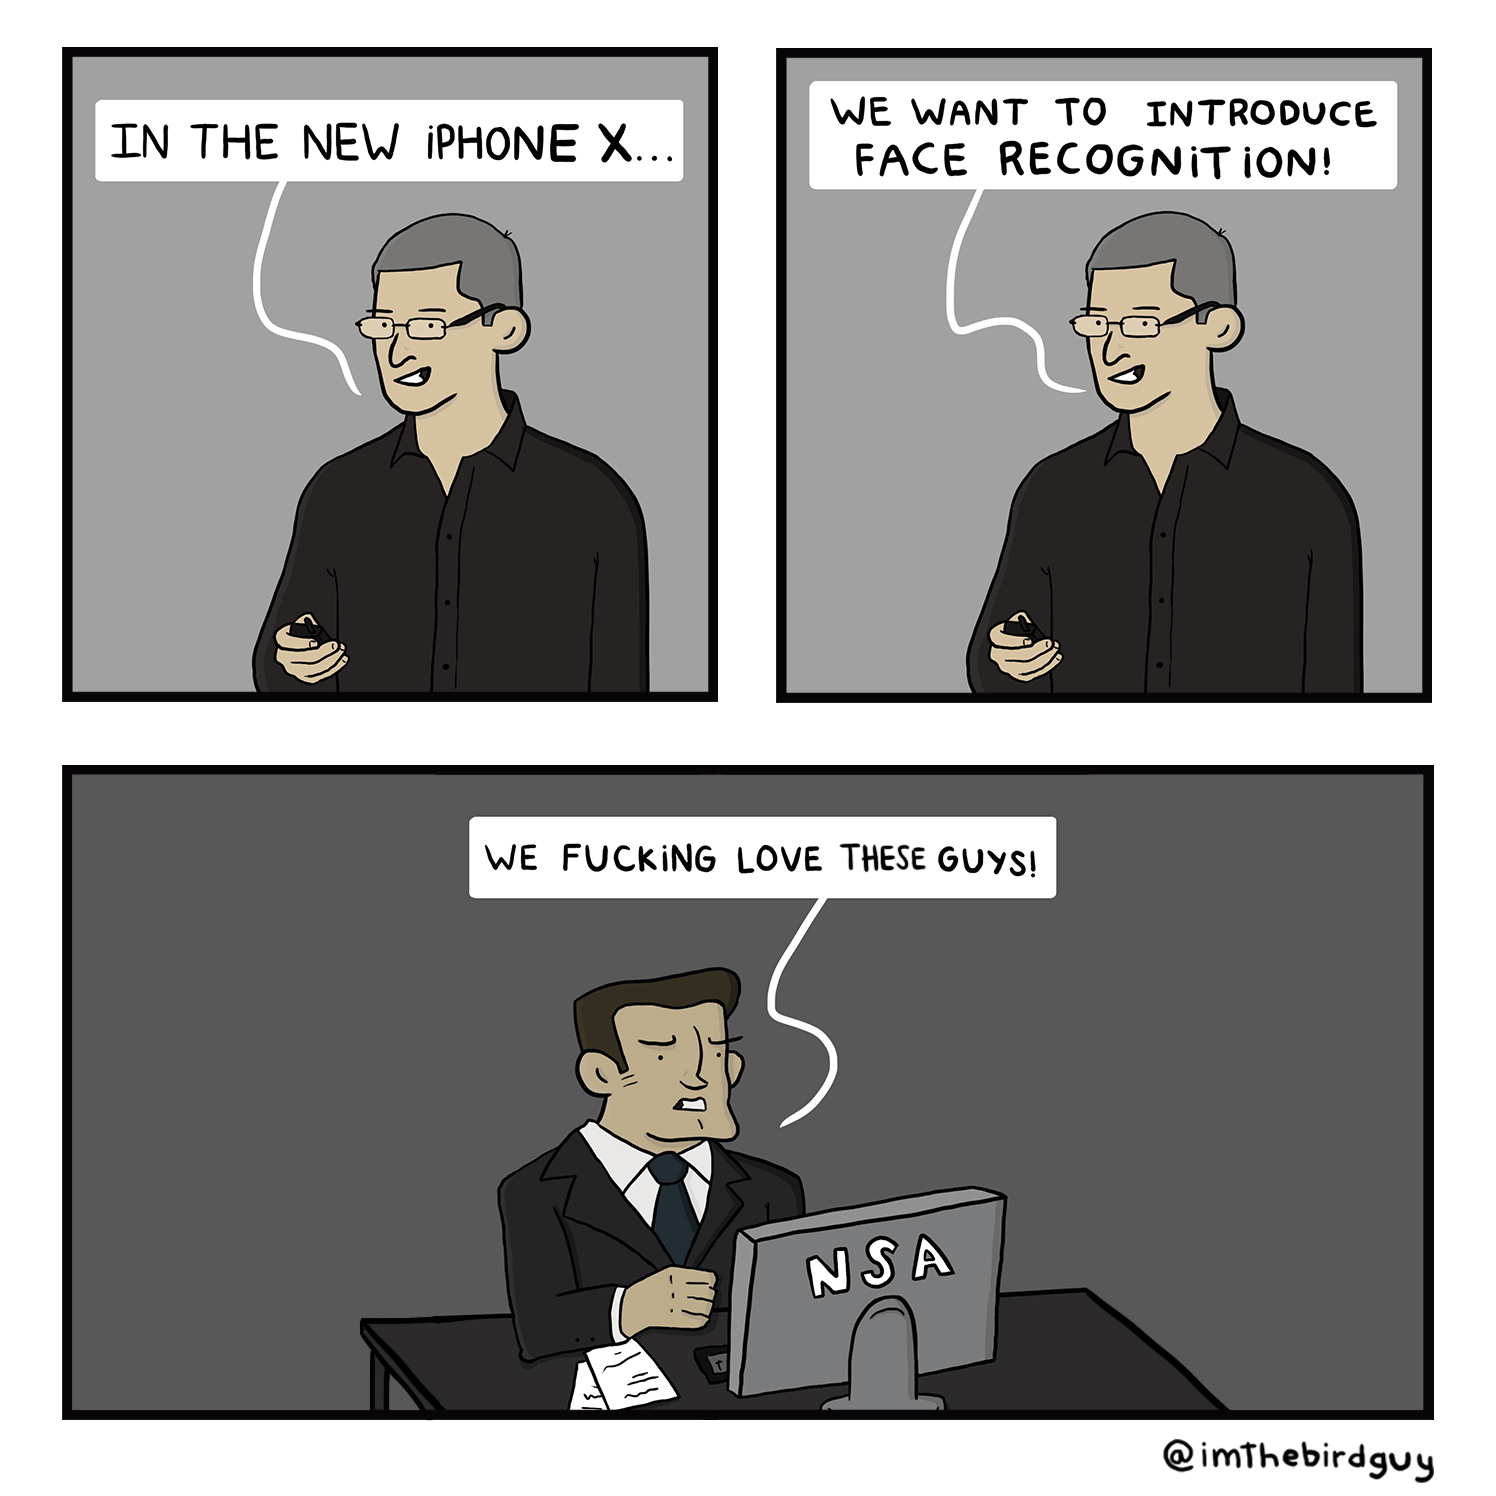 Webcomic about how the NSA loves iPhoneX with it's face recognition technology.